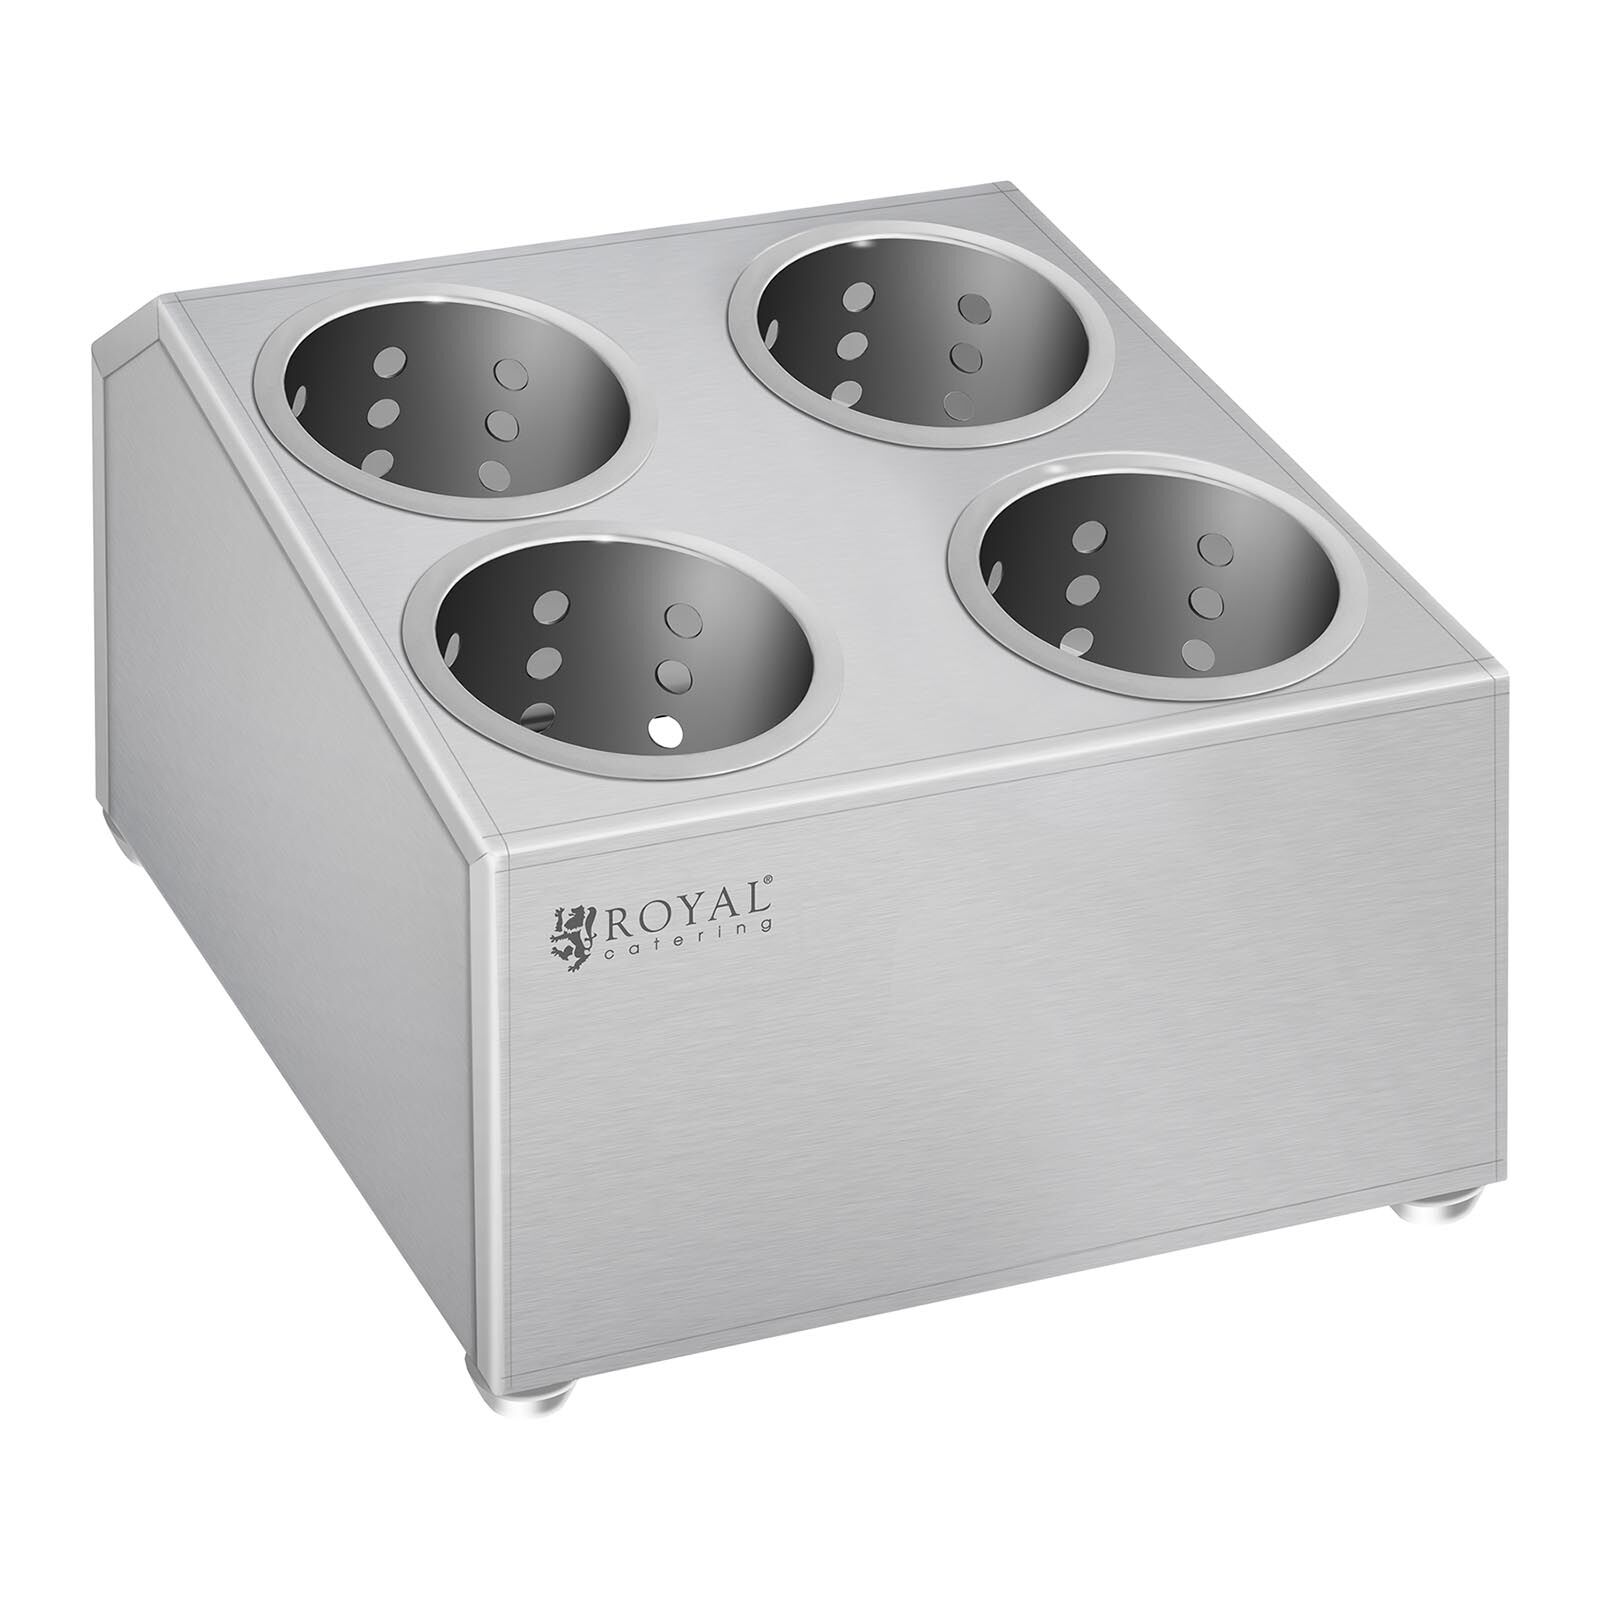 Royal Catering Cutlery container - Stainless steel - With 4 cutlery holders